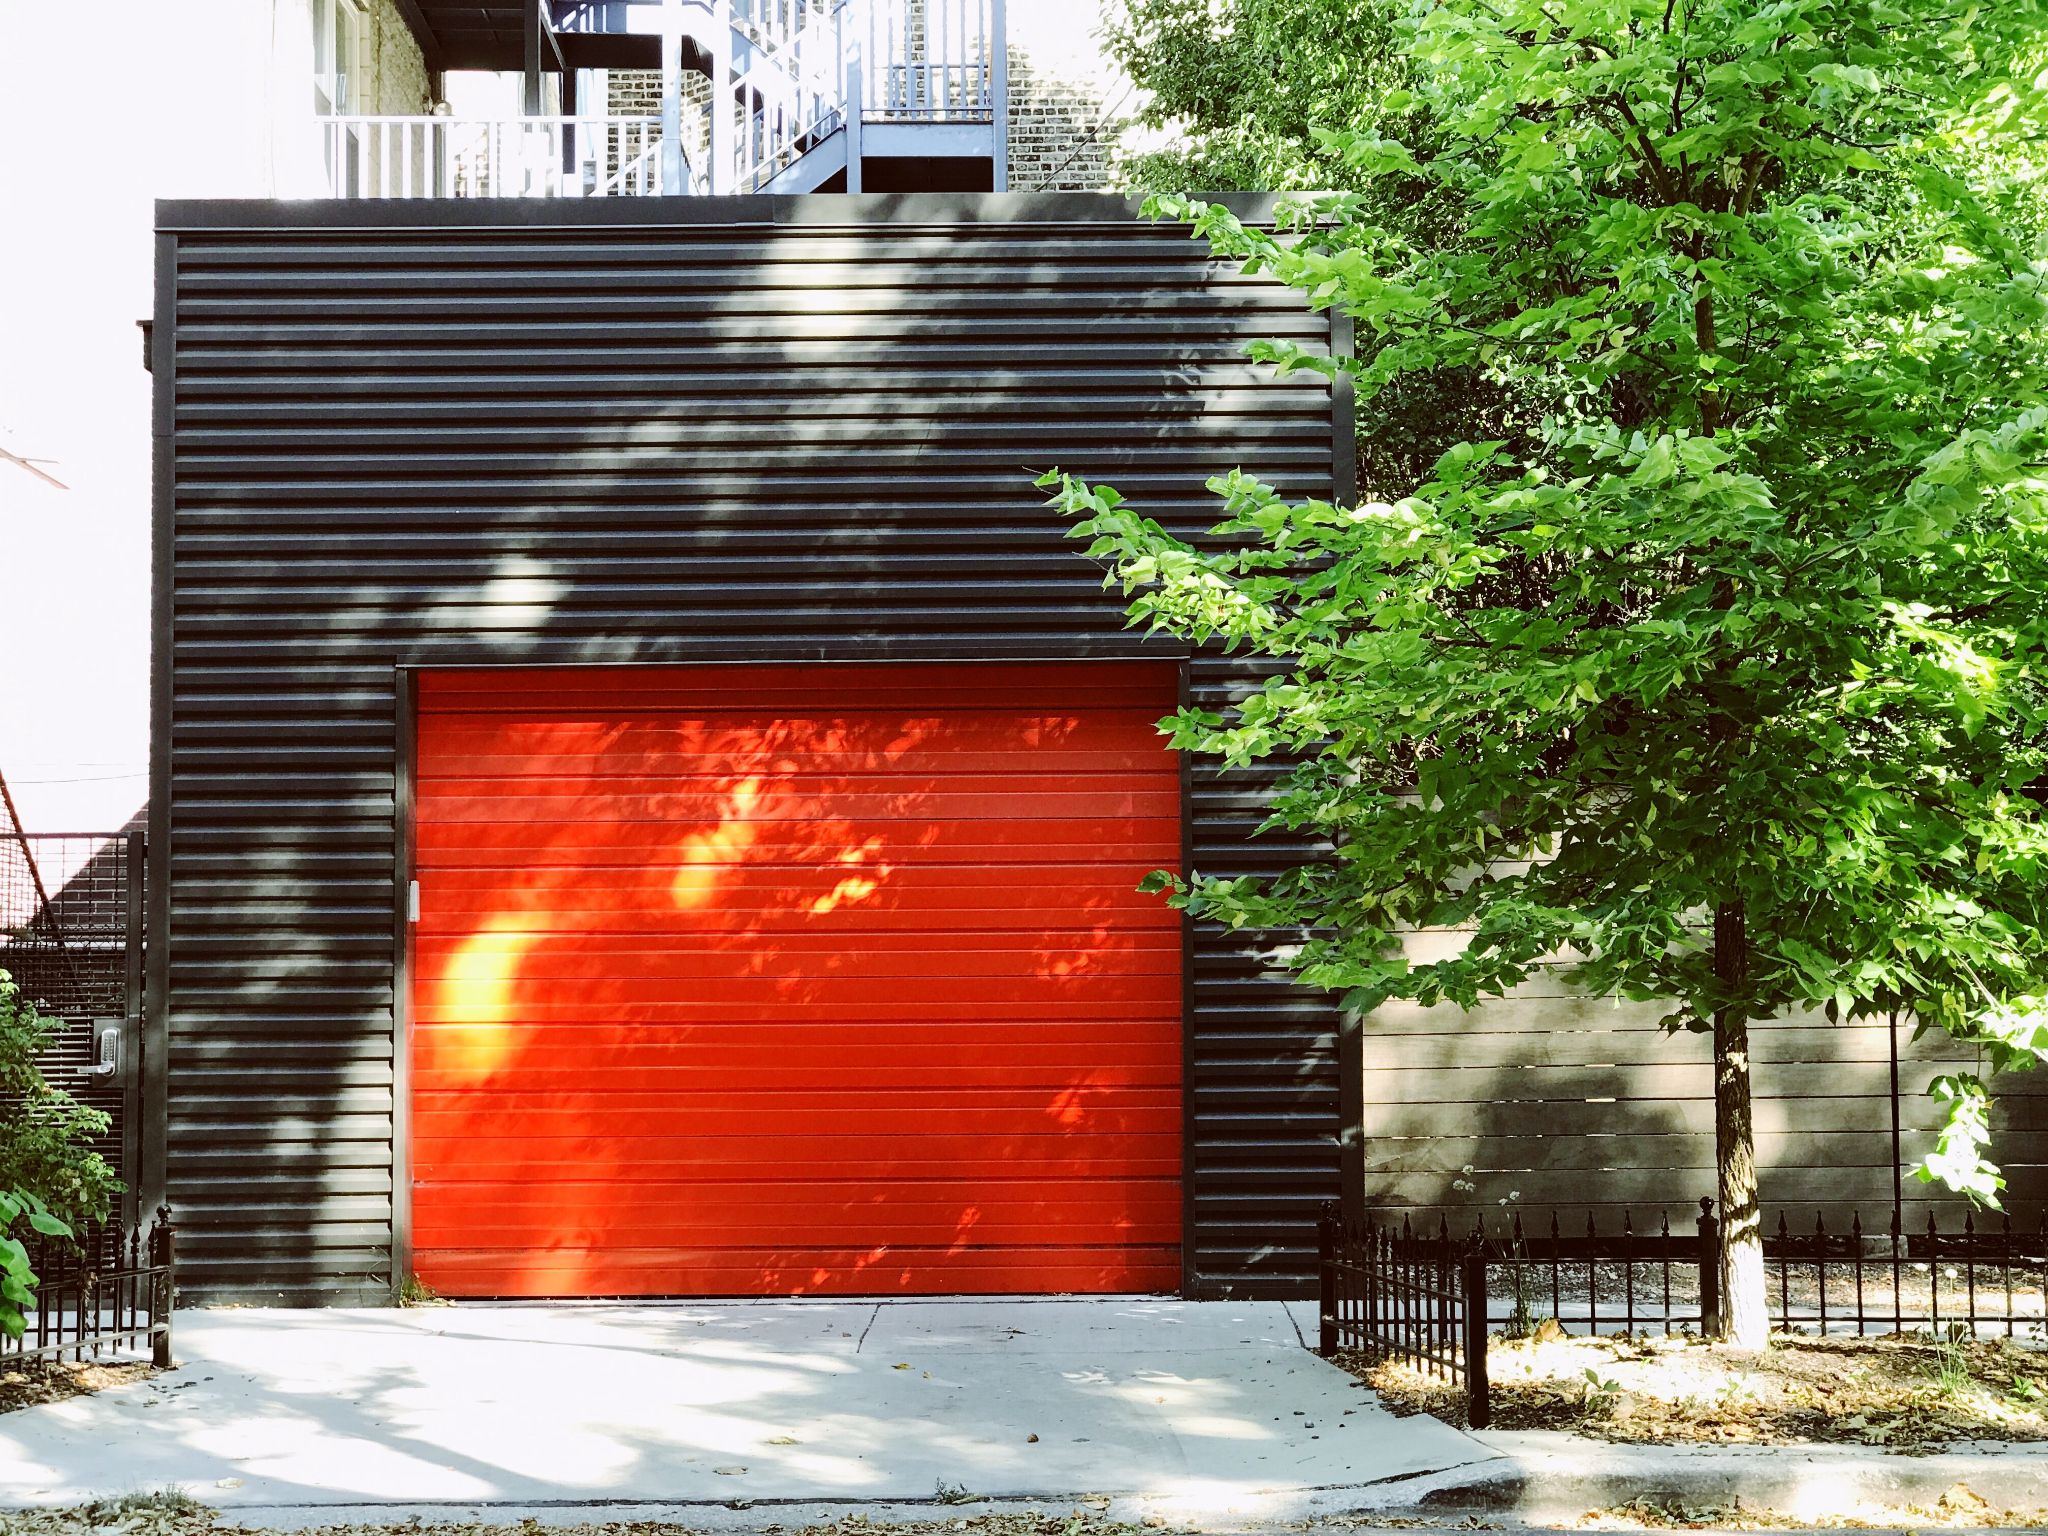 How To Prevent Common Injuries Due To Garage Door Accident